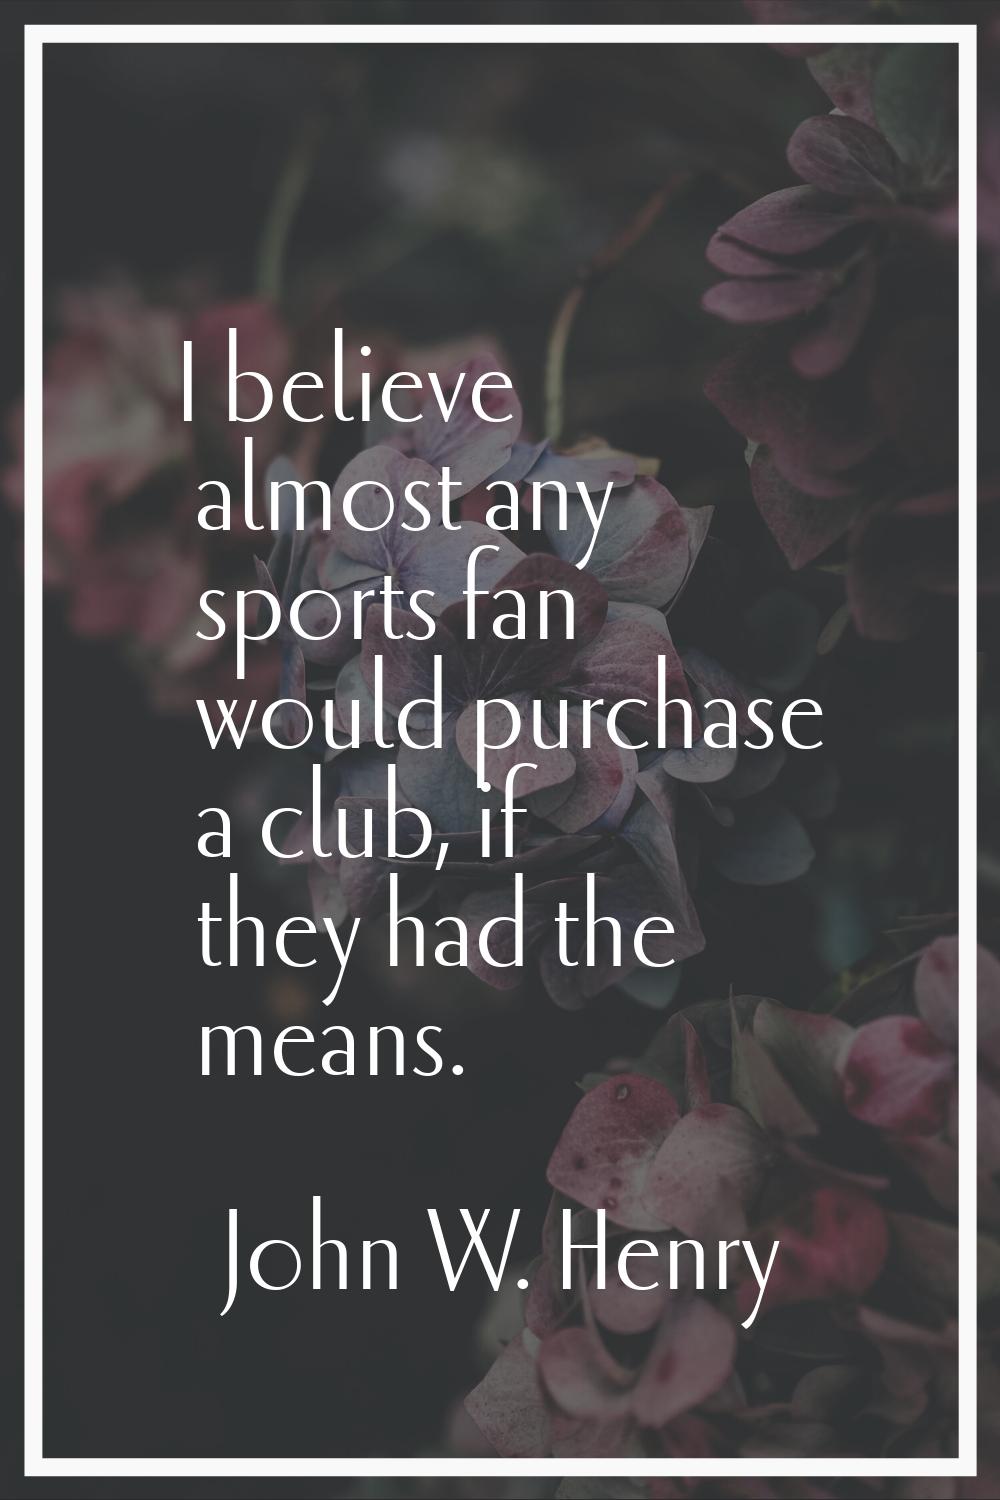 I believe almost any sports fan would purchase a club, if they had the means.